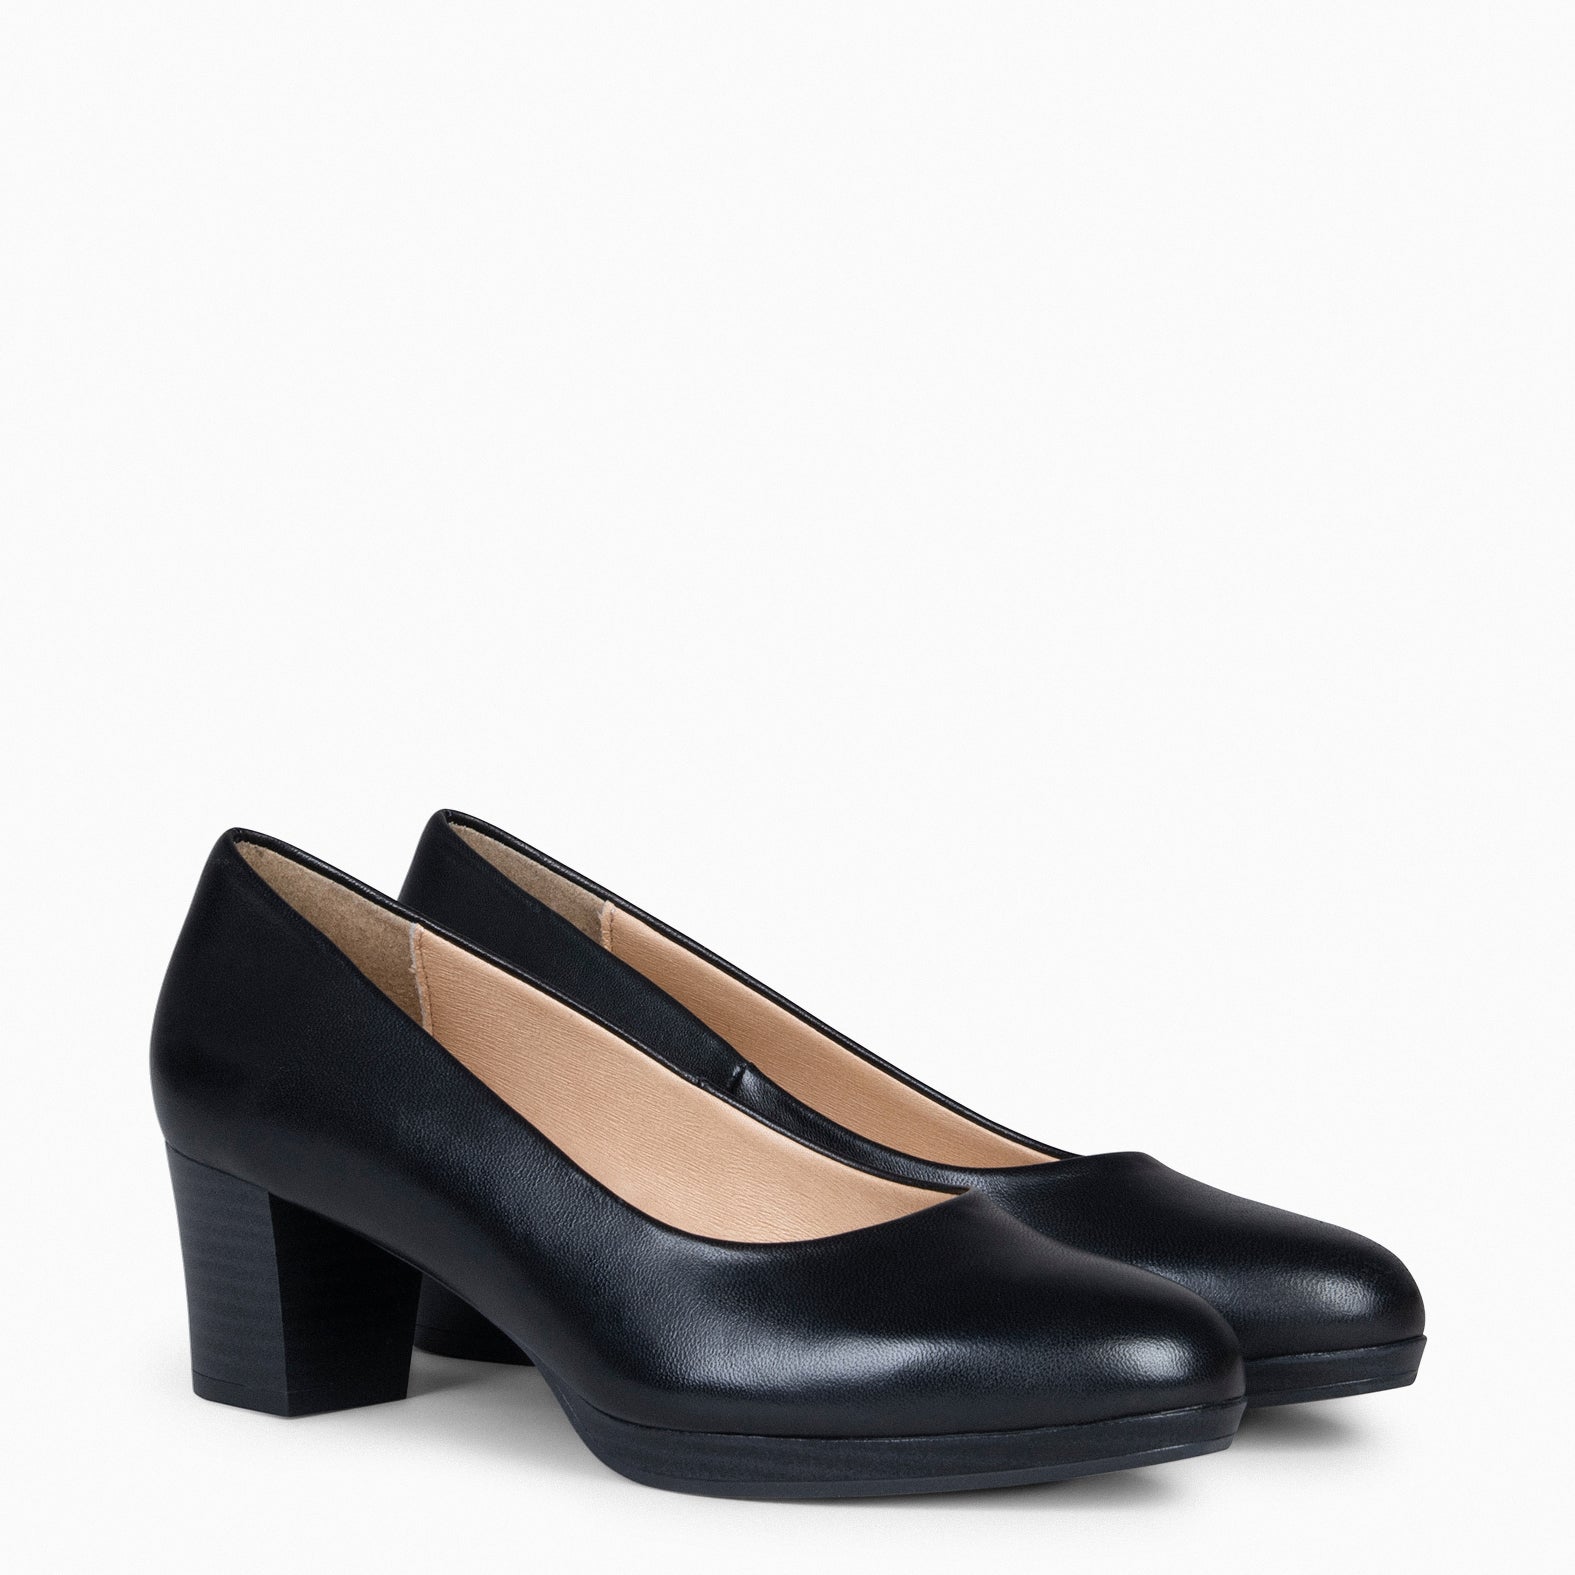 FLIGHT S – BLACK shoes with low heel and platform